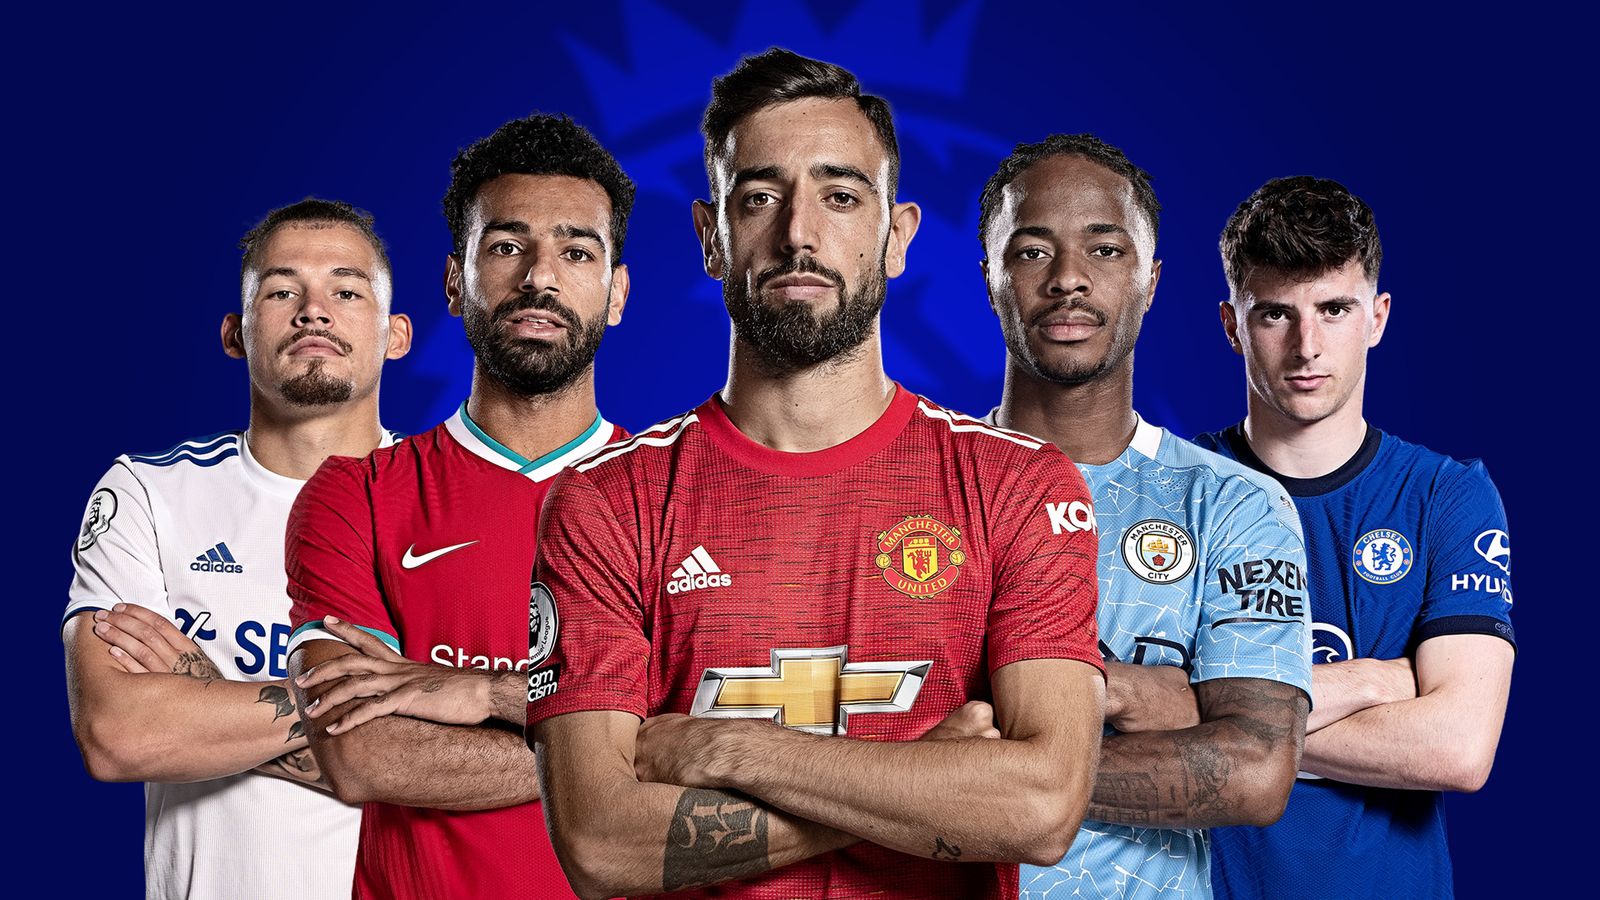 Premier League live on Sky Sports Leeds face Man Utd and Liverpool in